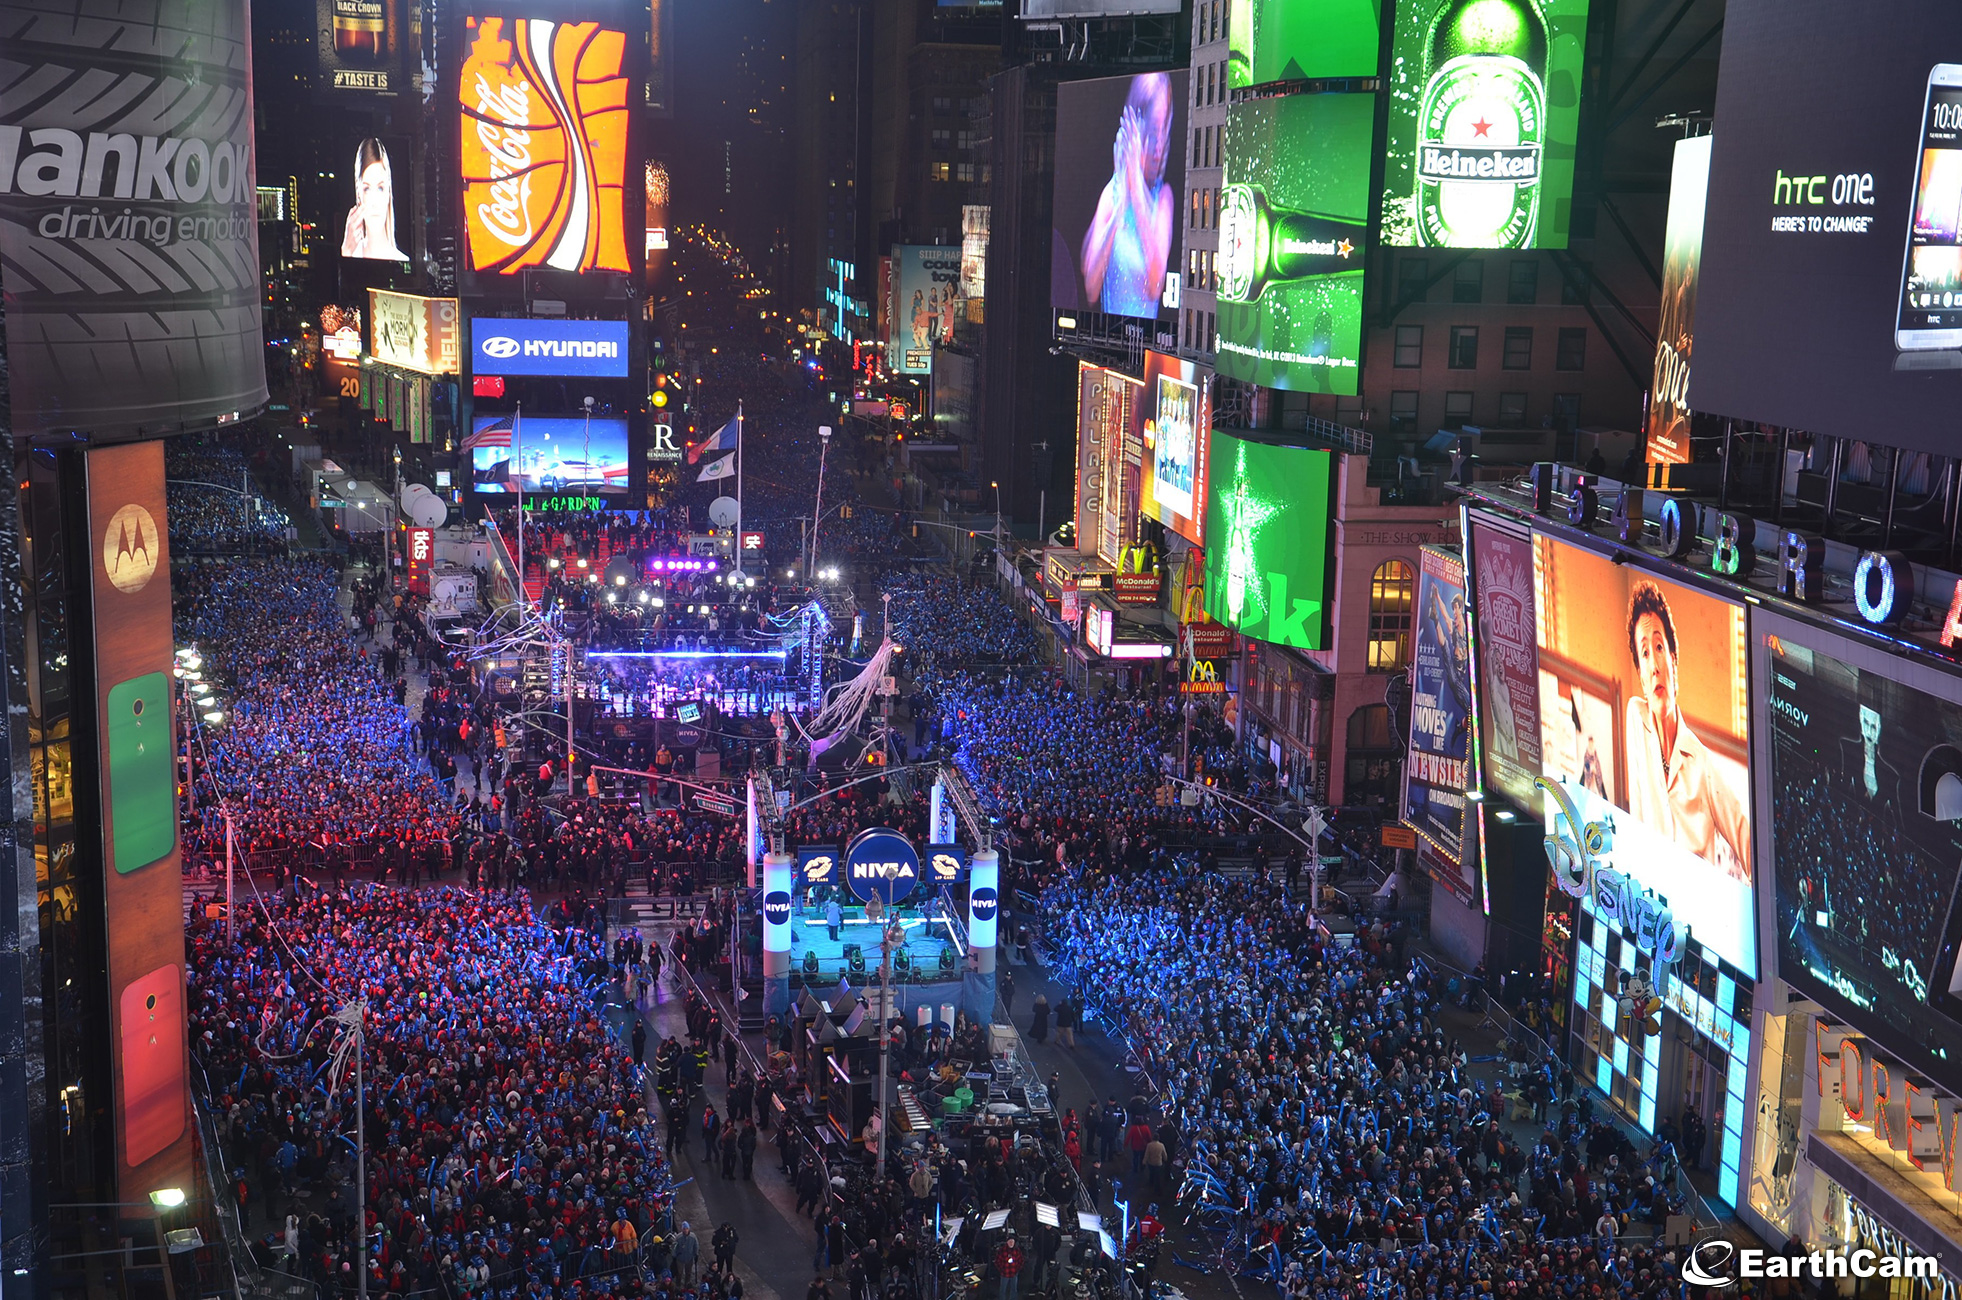 Join the millions of people who will celebrate the start of 2015 in Times Square